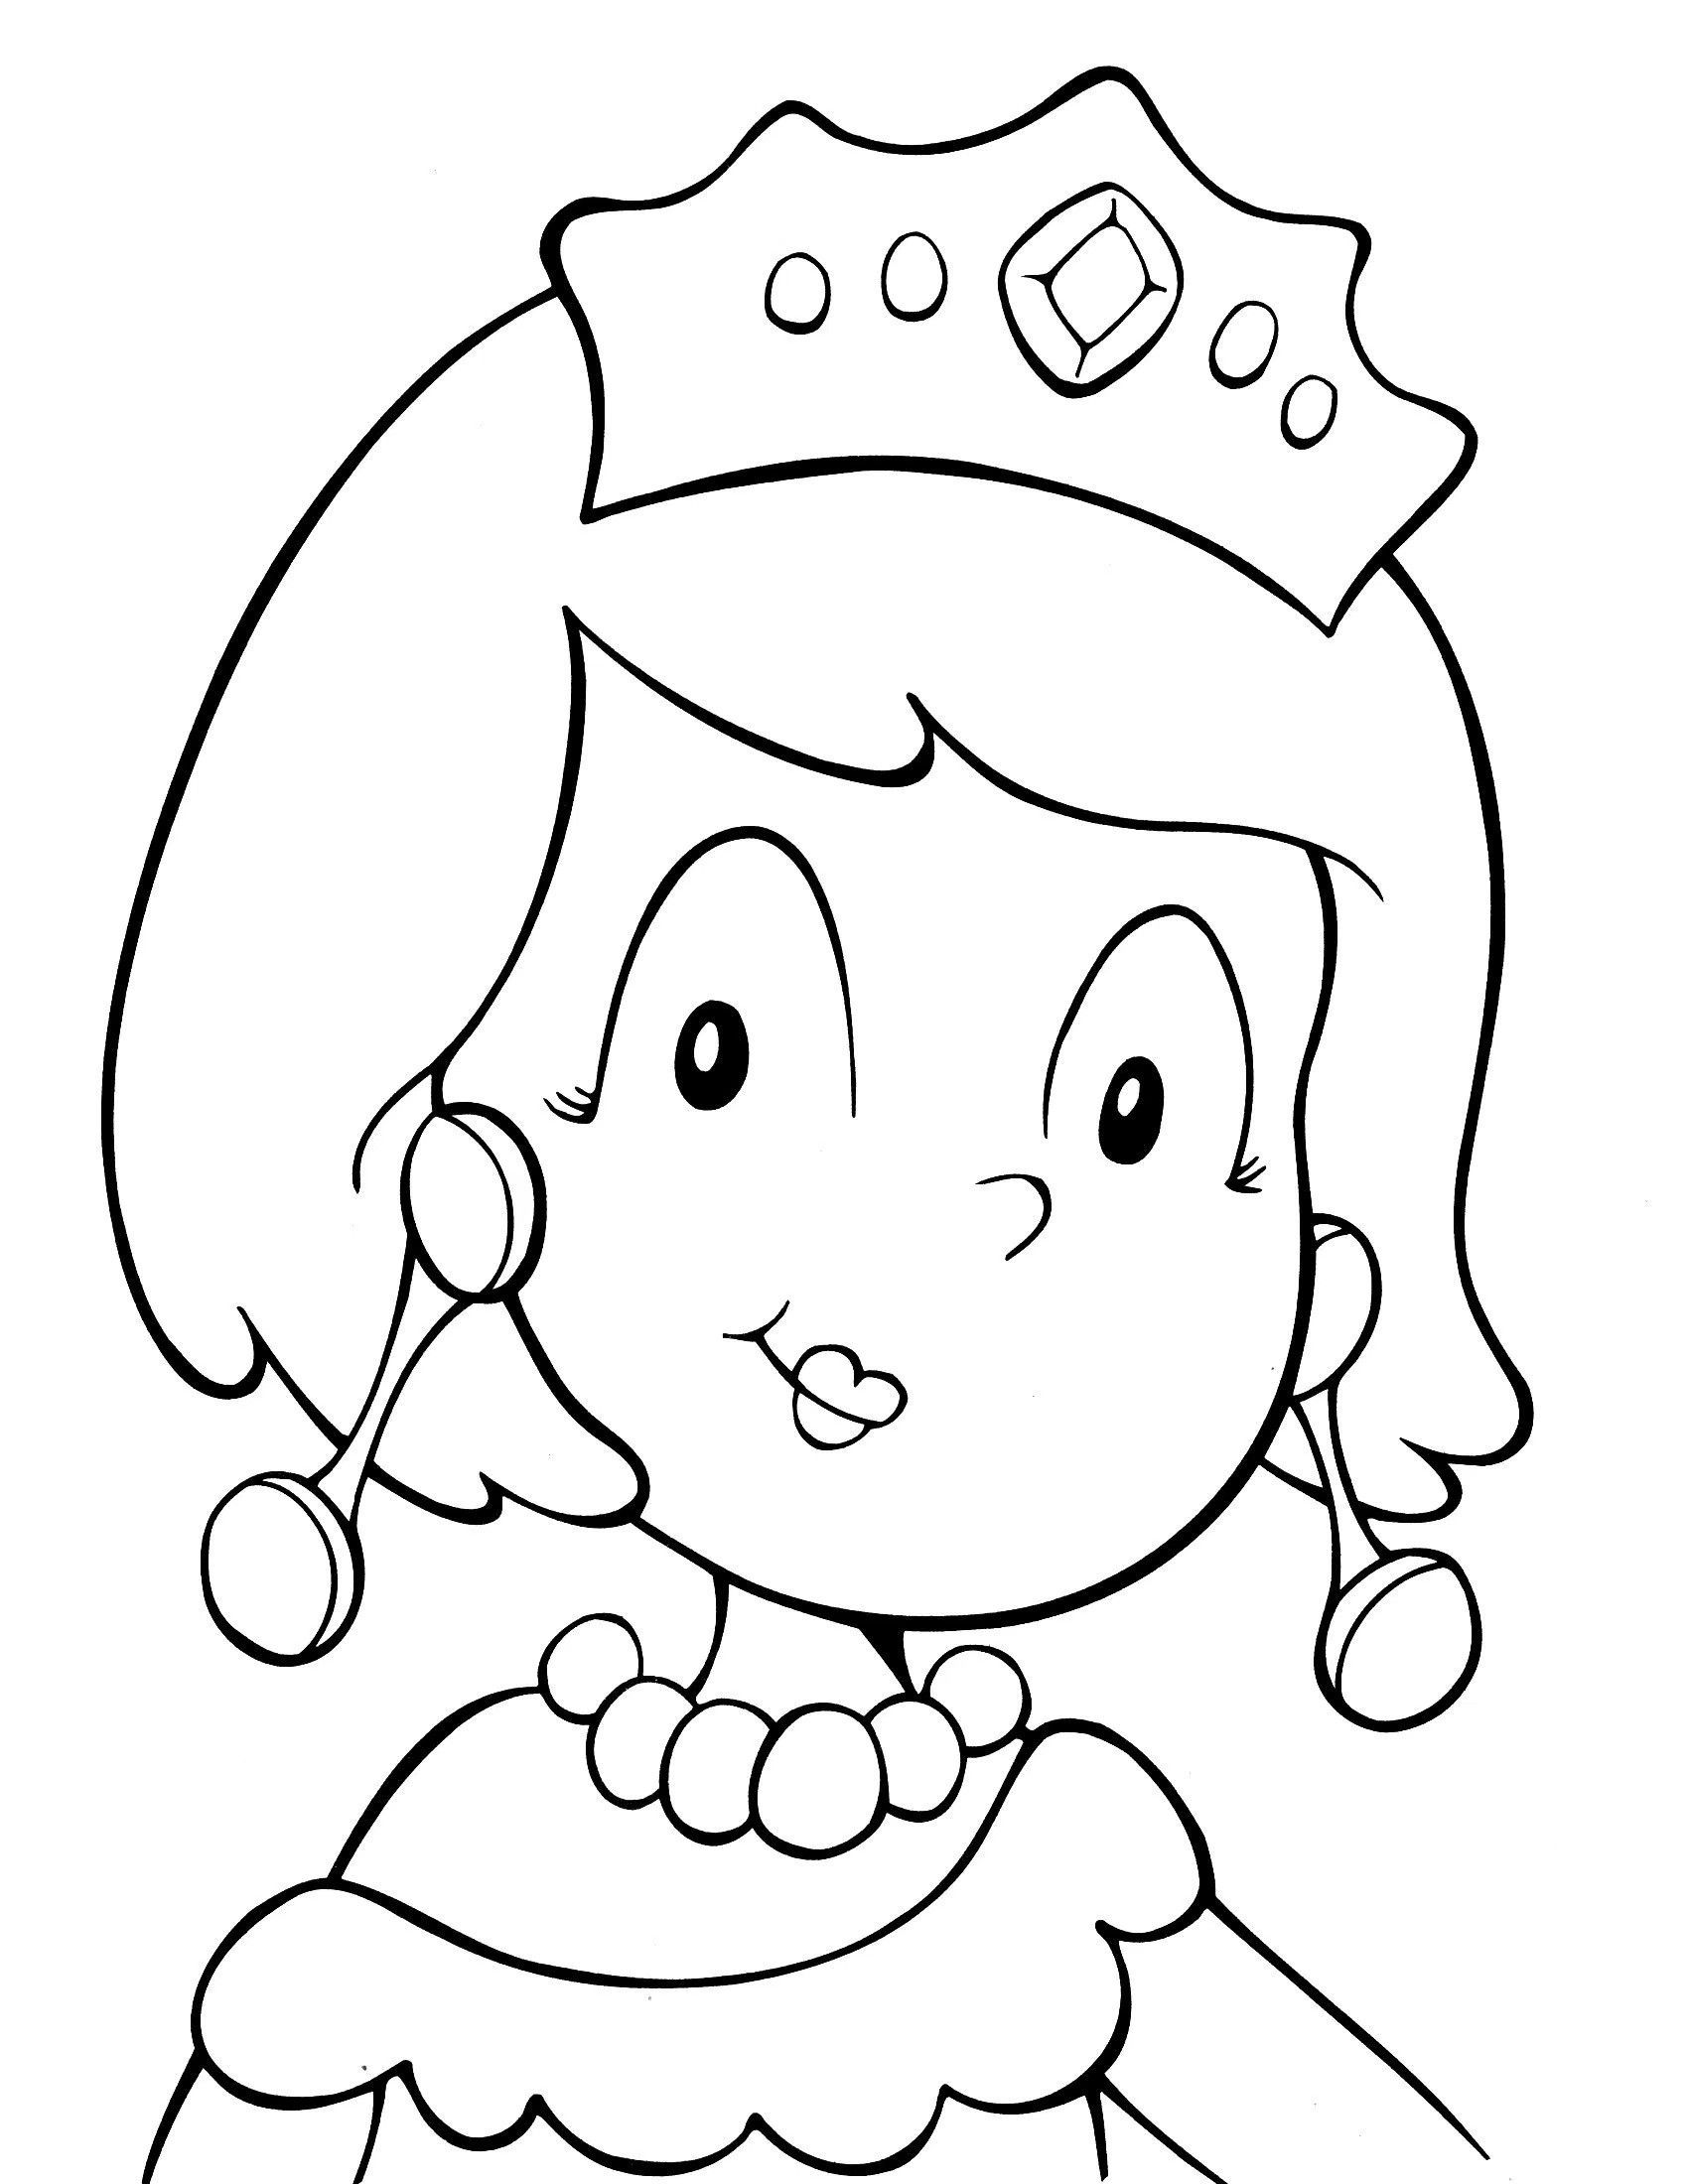 Crayola Christmas Coloring Pages at Free printable